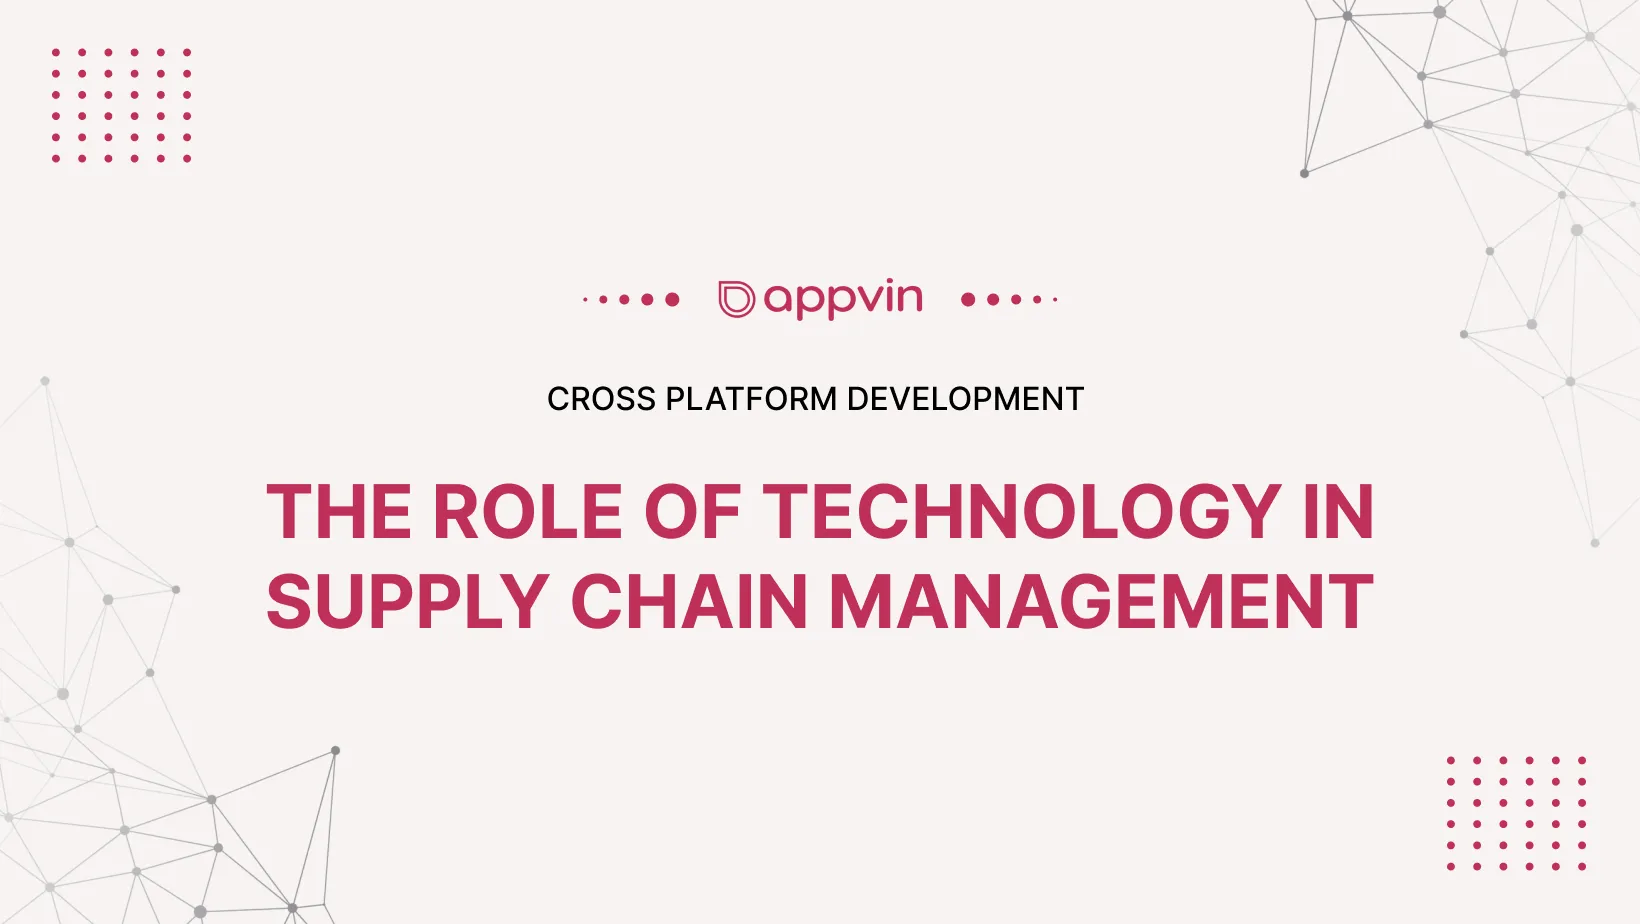 The role of technology in supply chain management